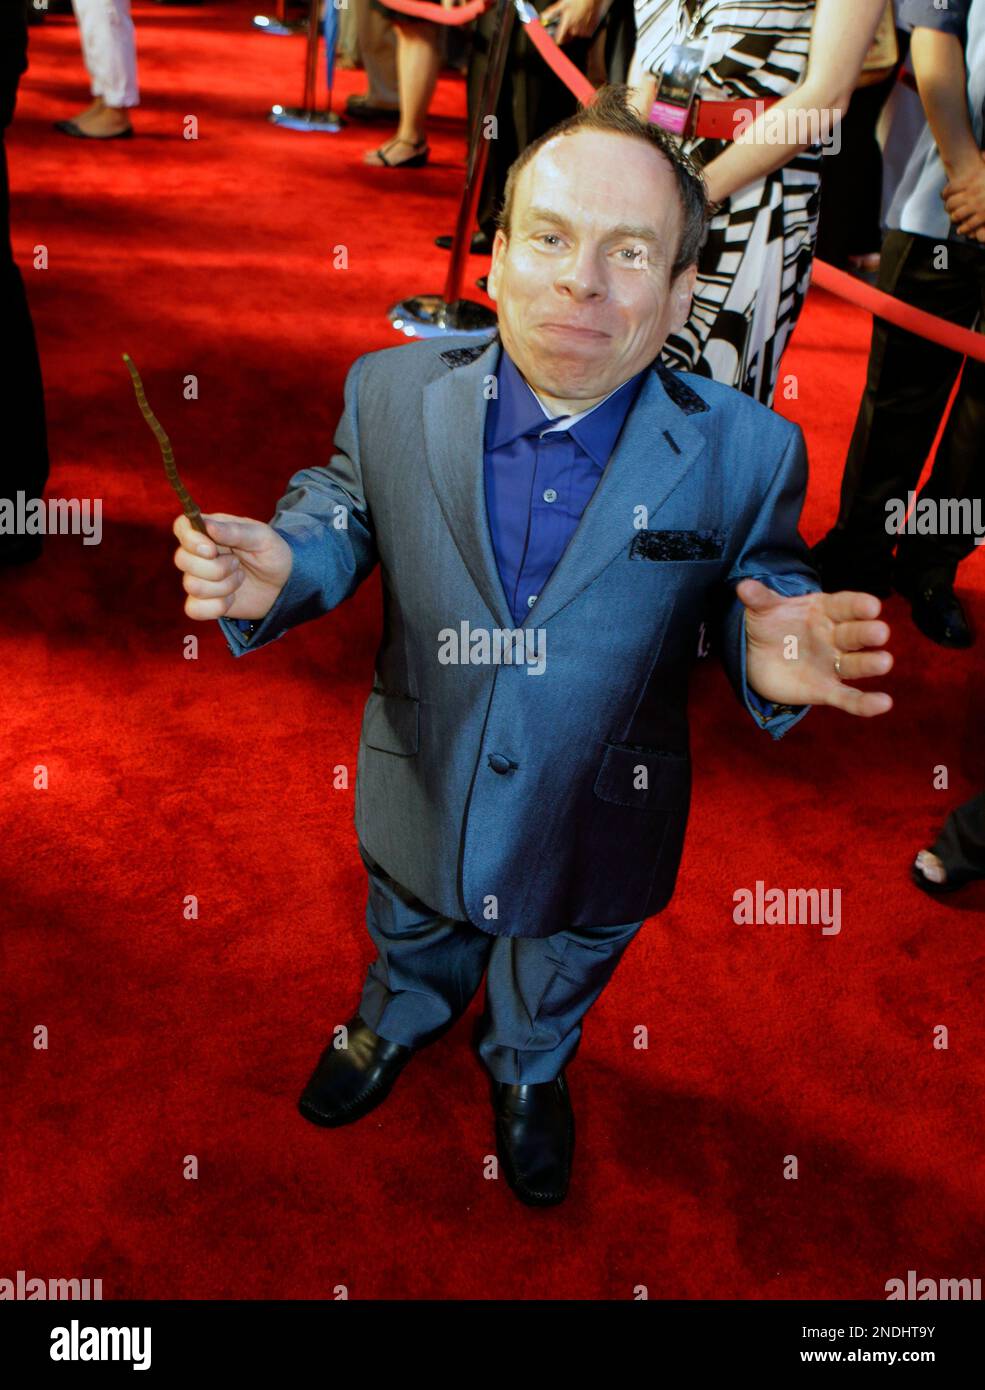 Actor Warwick Davis , who plays the part of Professor Filius Flitwick in the Harry Potter films, attends the grand opening celebration at the Wizarding World of Harry Potter at Universal Orlando Resort theme park in Orlando, Fla., Wednesday, June 16, 2010.(AP Photo/John Raoux) Stock Photo